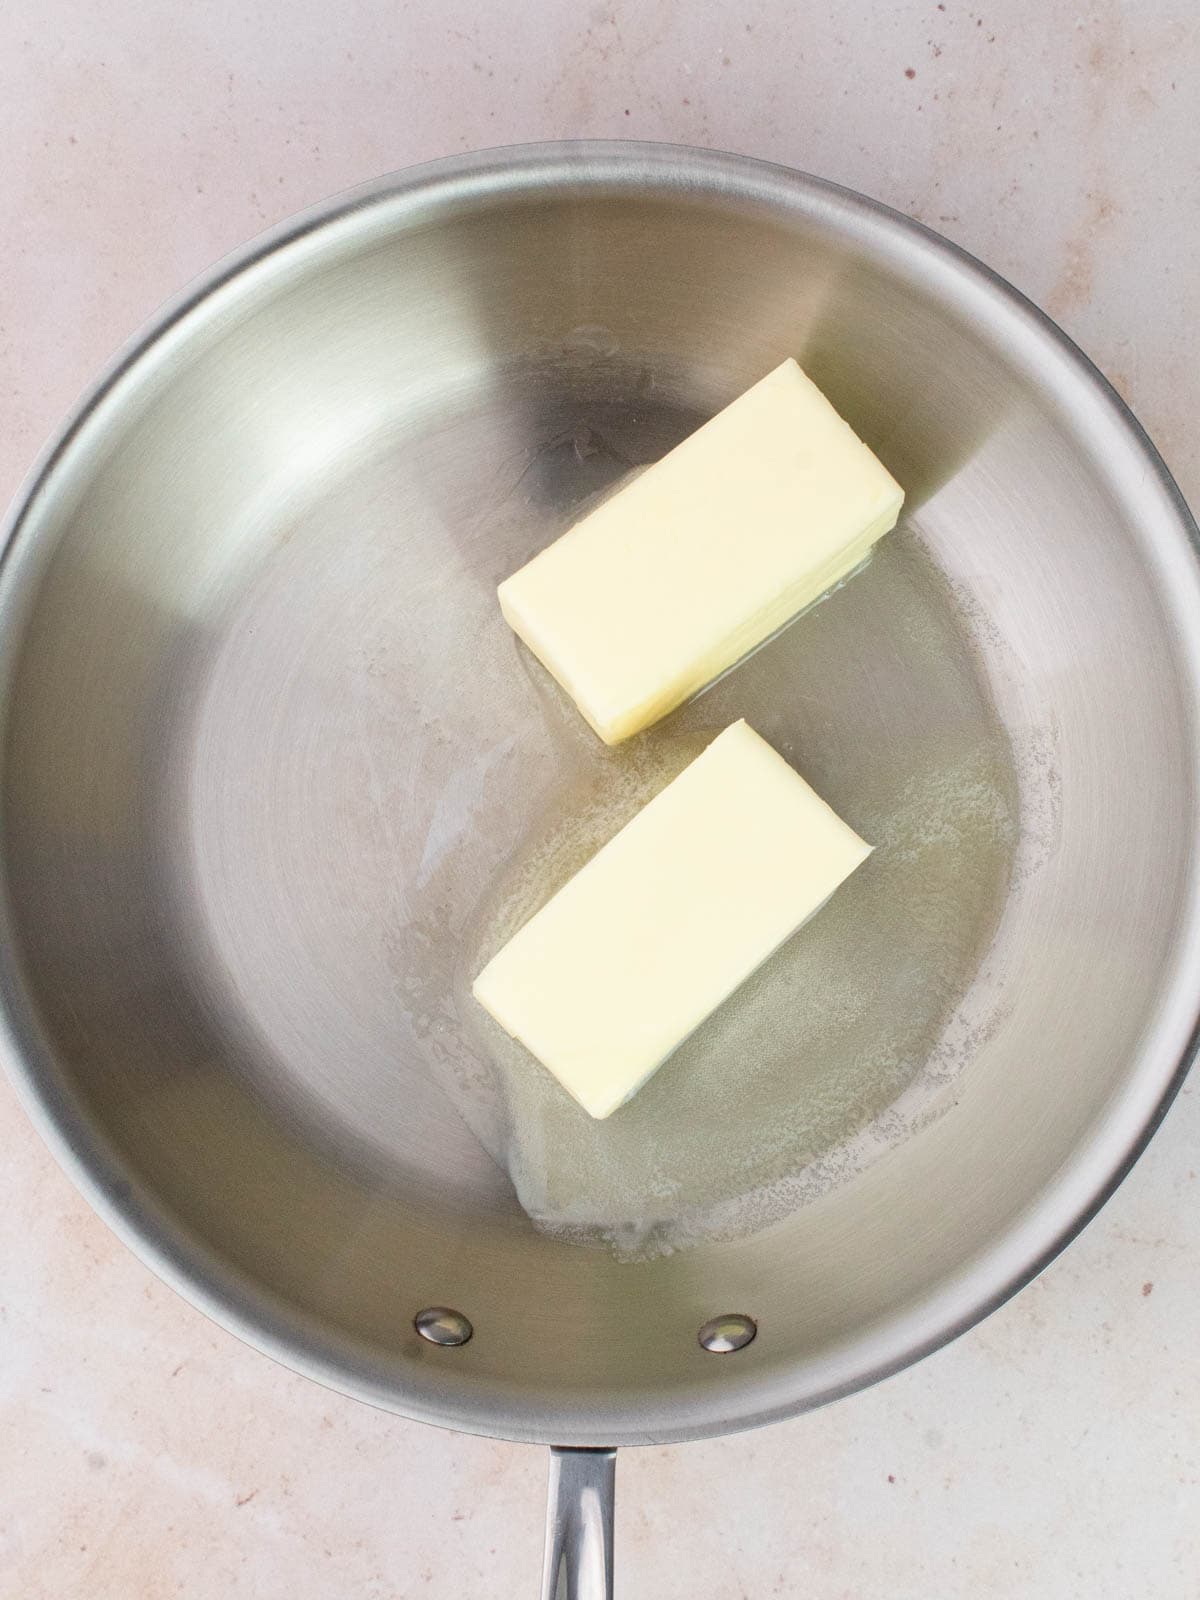 Two sticks of butter in a pan